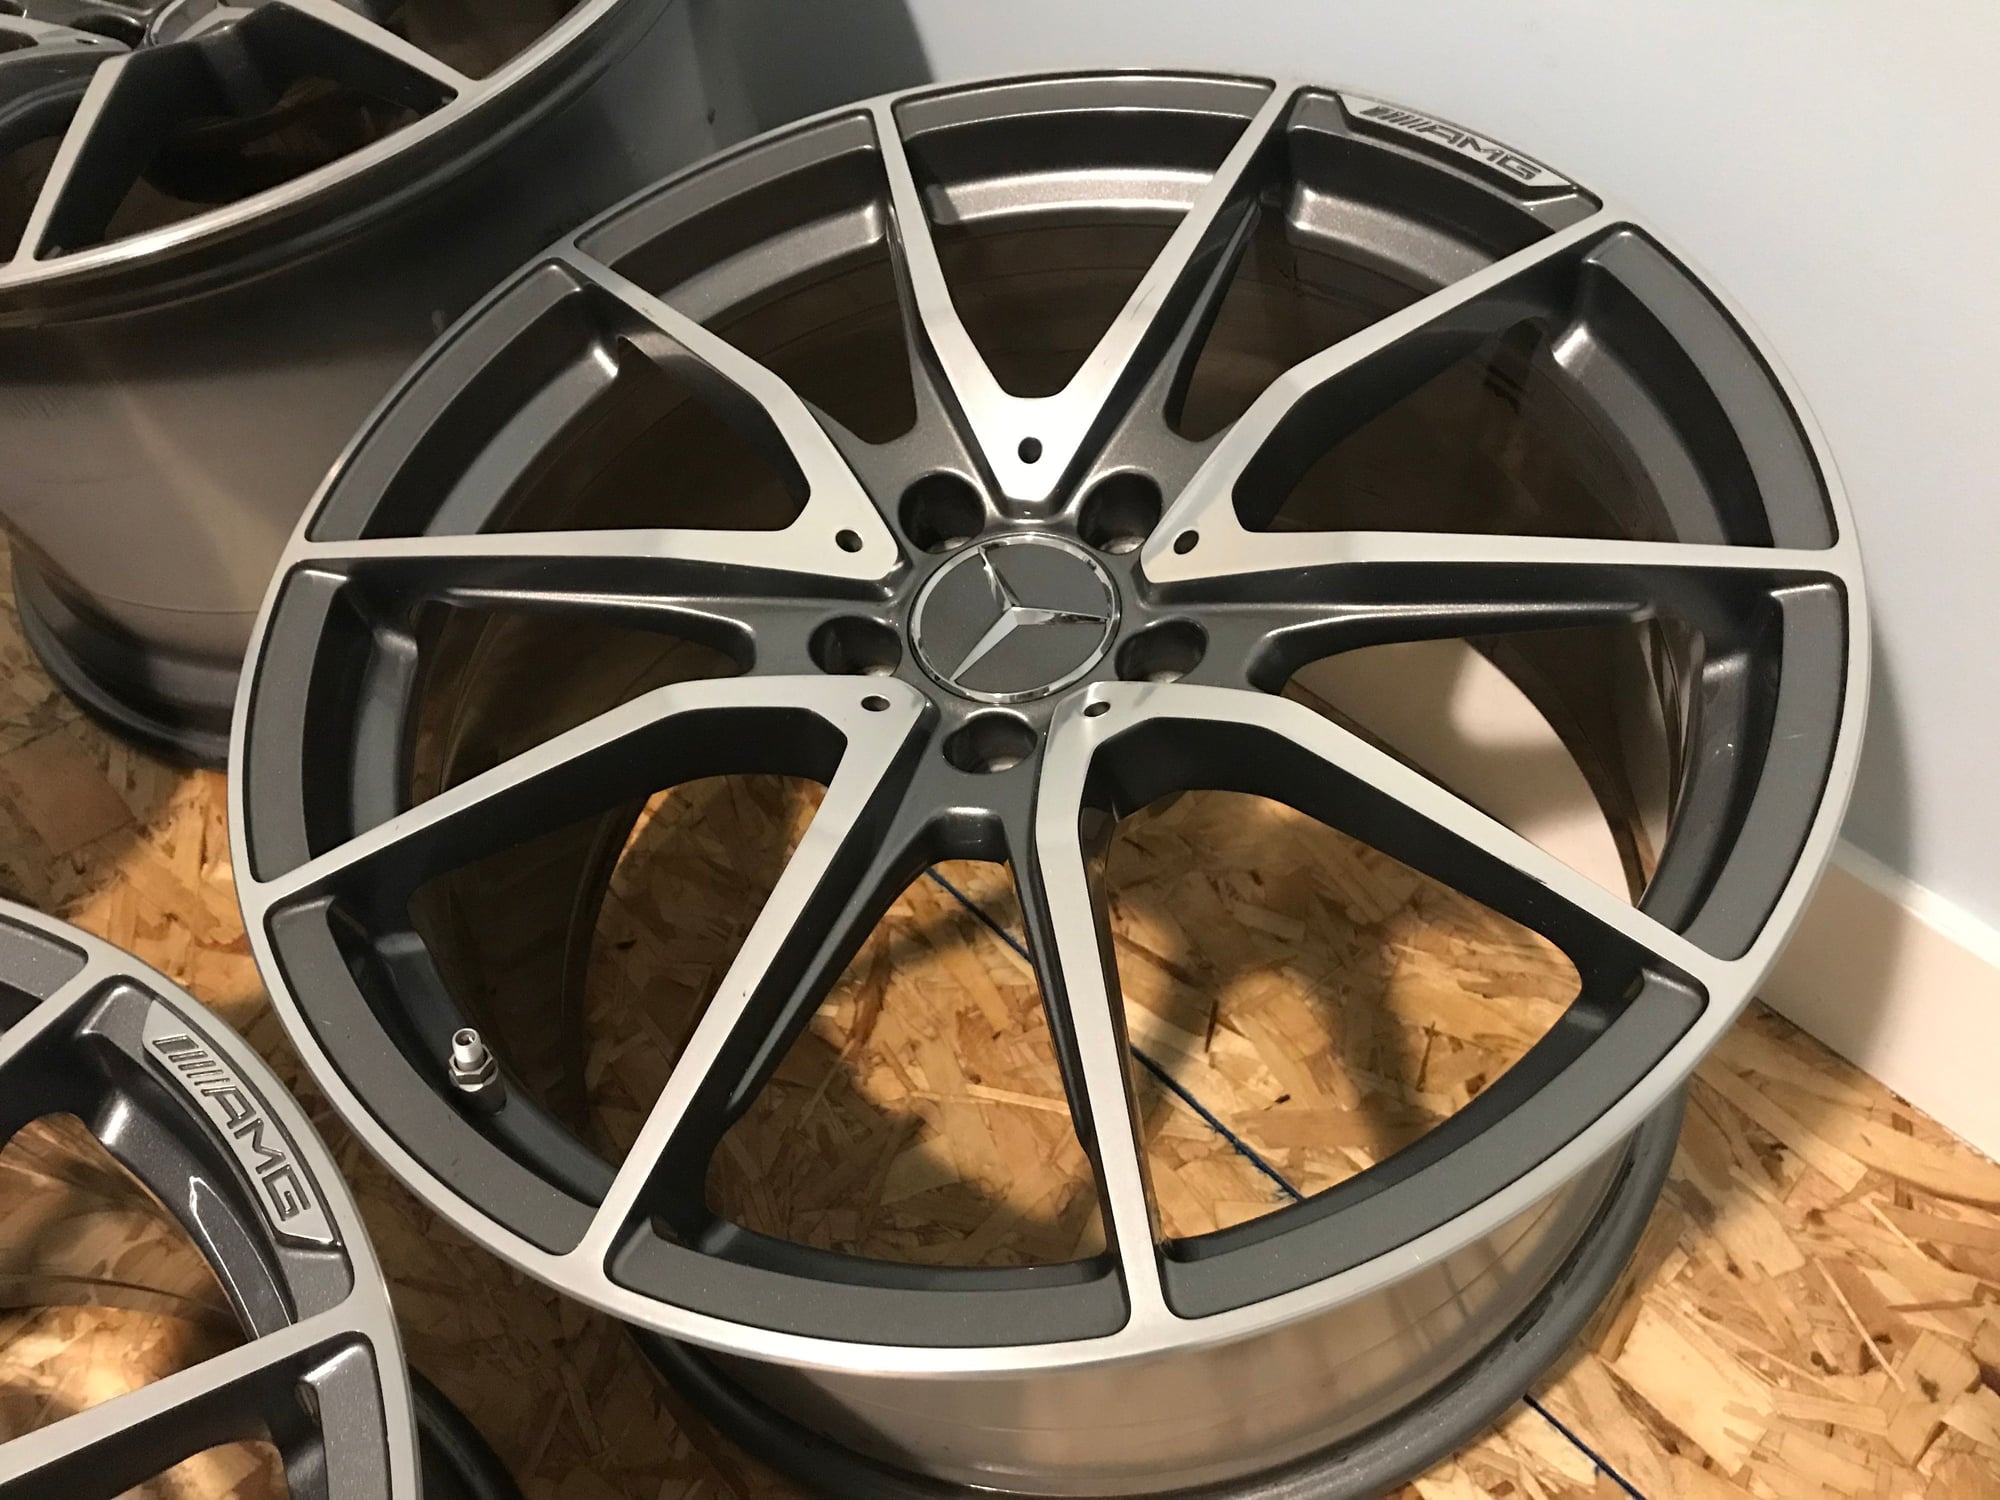 Wheels and Tires/Axles - Mercedes Benz AMG GT R Factory wheels 19x10, 20x12 graphite machined. - Used - 2017 to 2020 Mercedes-Benz AMG GT R - Salt Lake City, UT 84121, United States